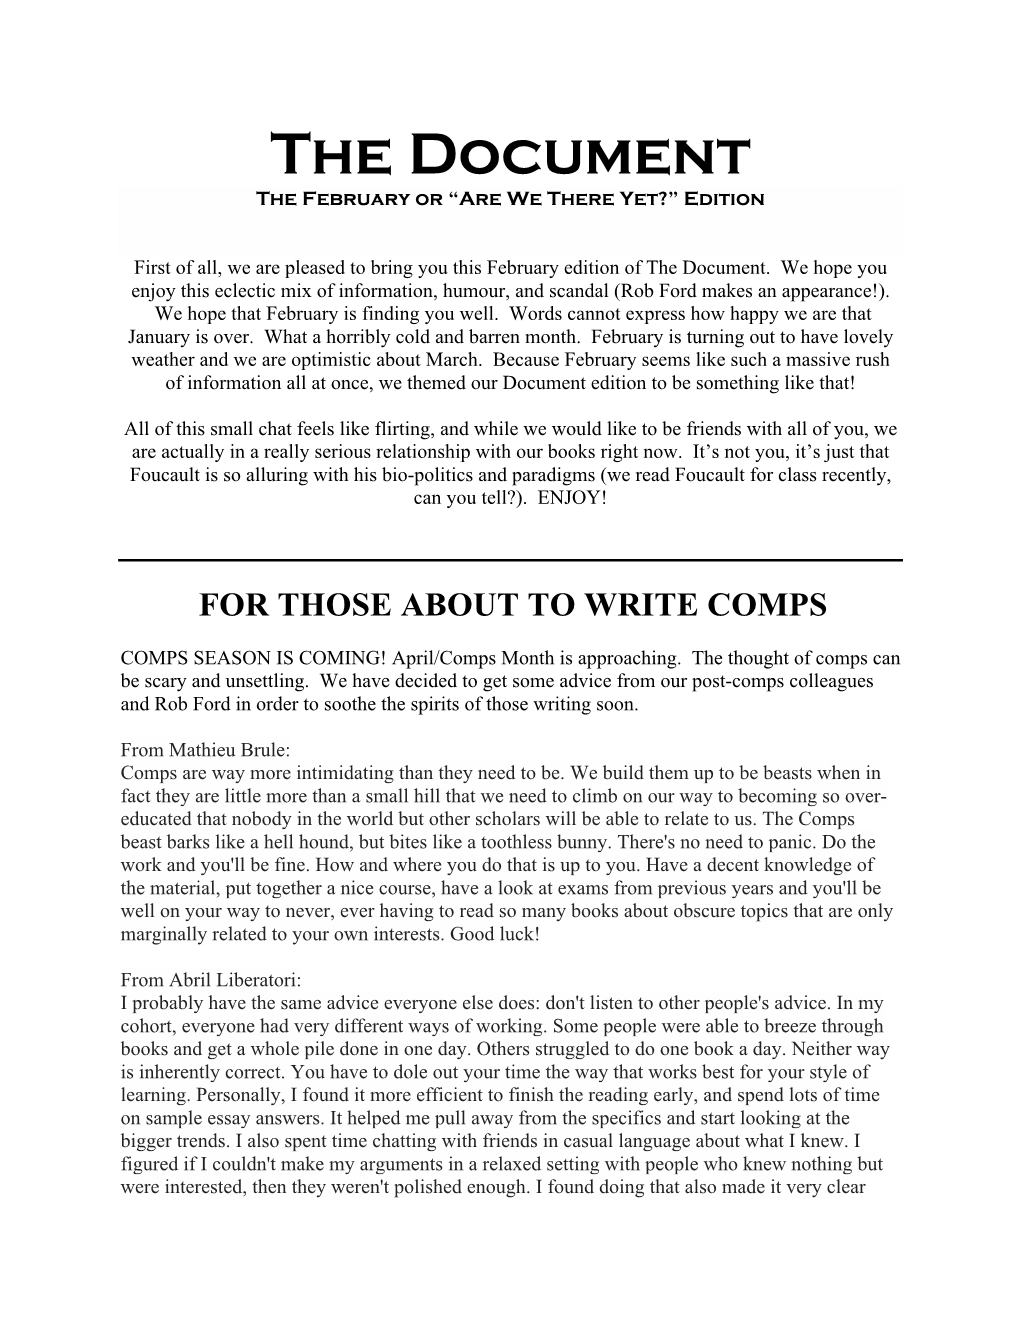 The Document the February Or “Are We There Yet?” Edition